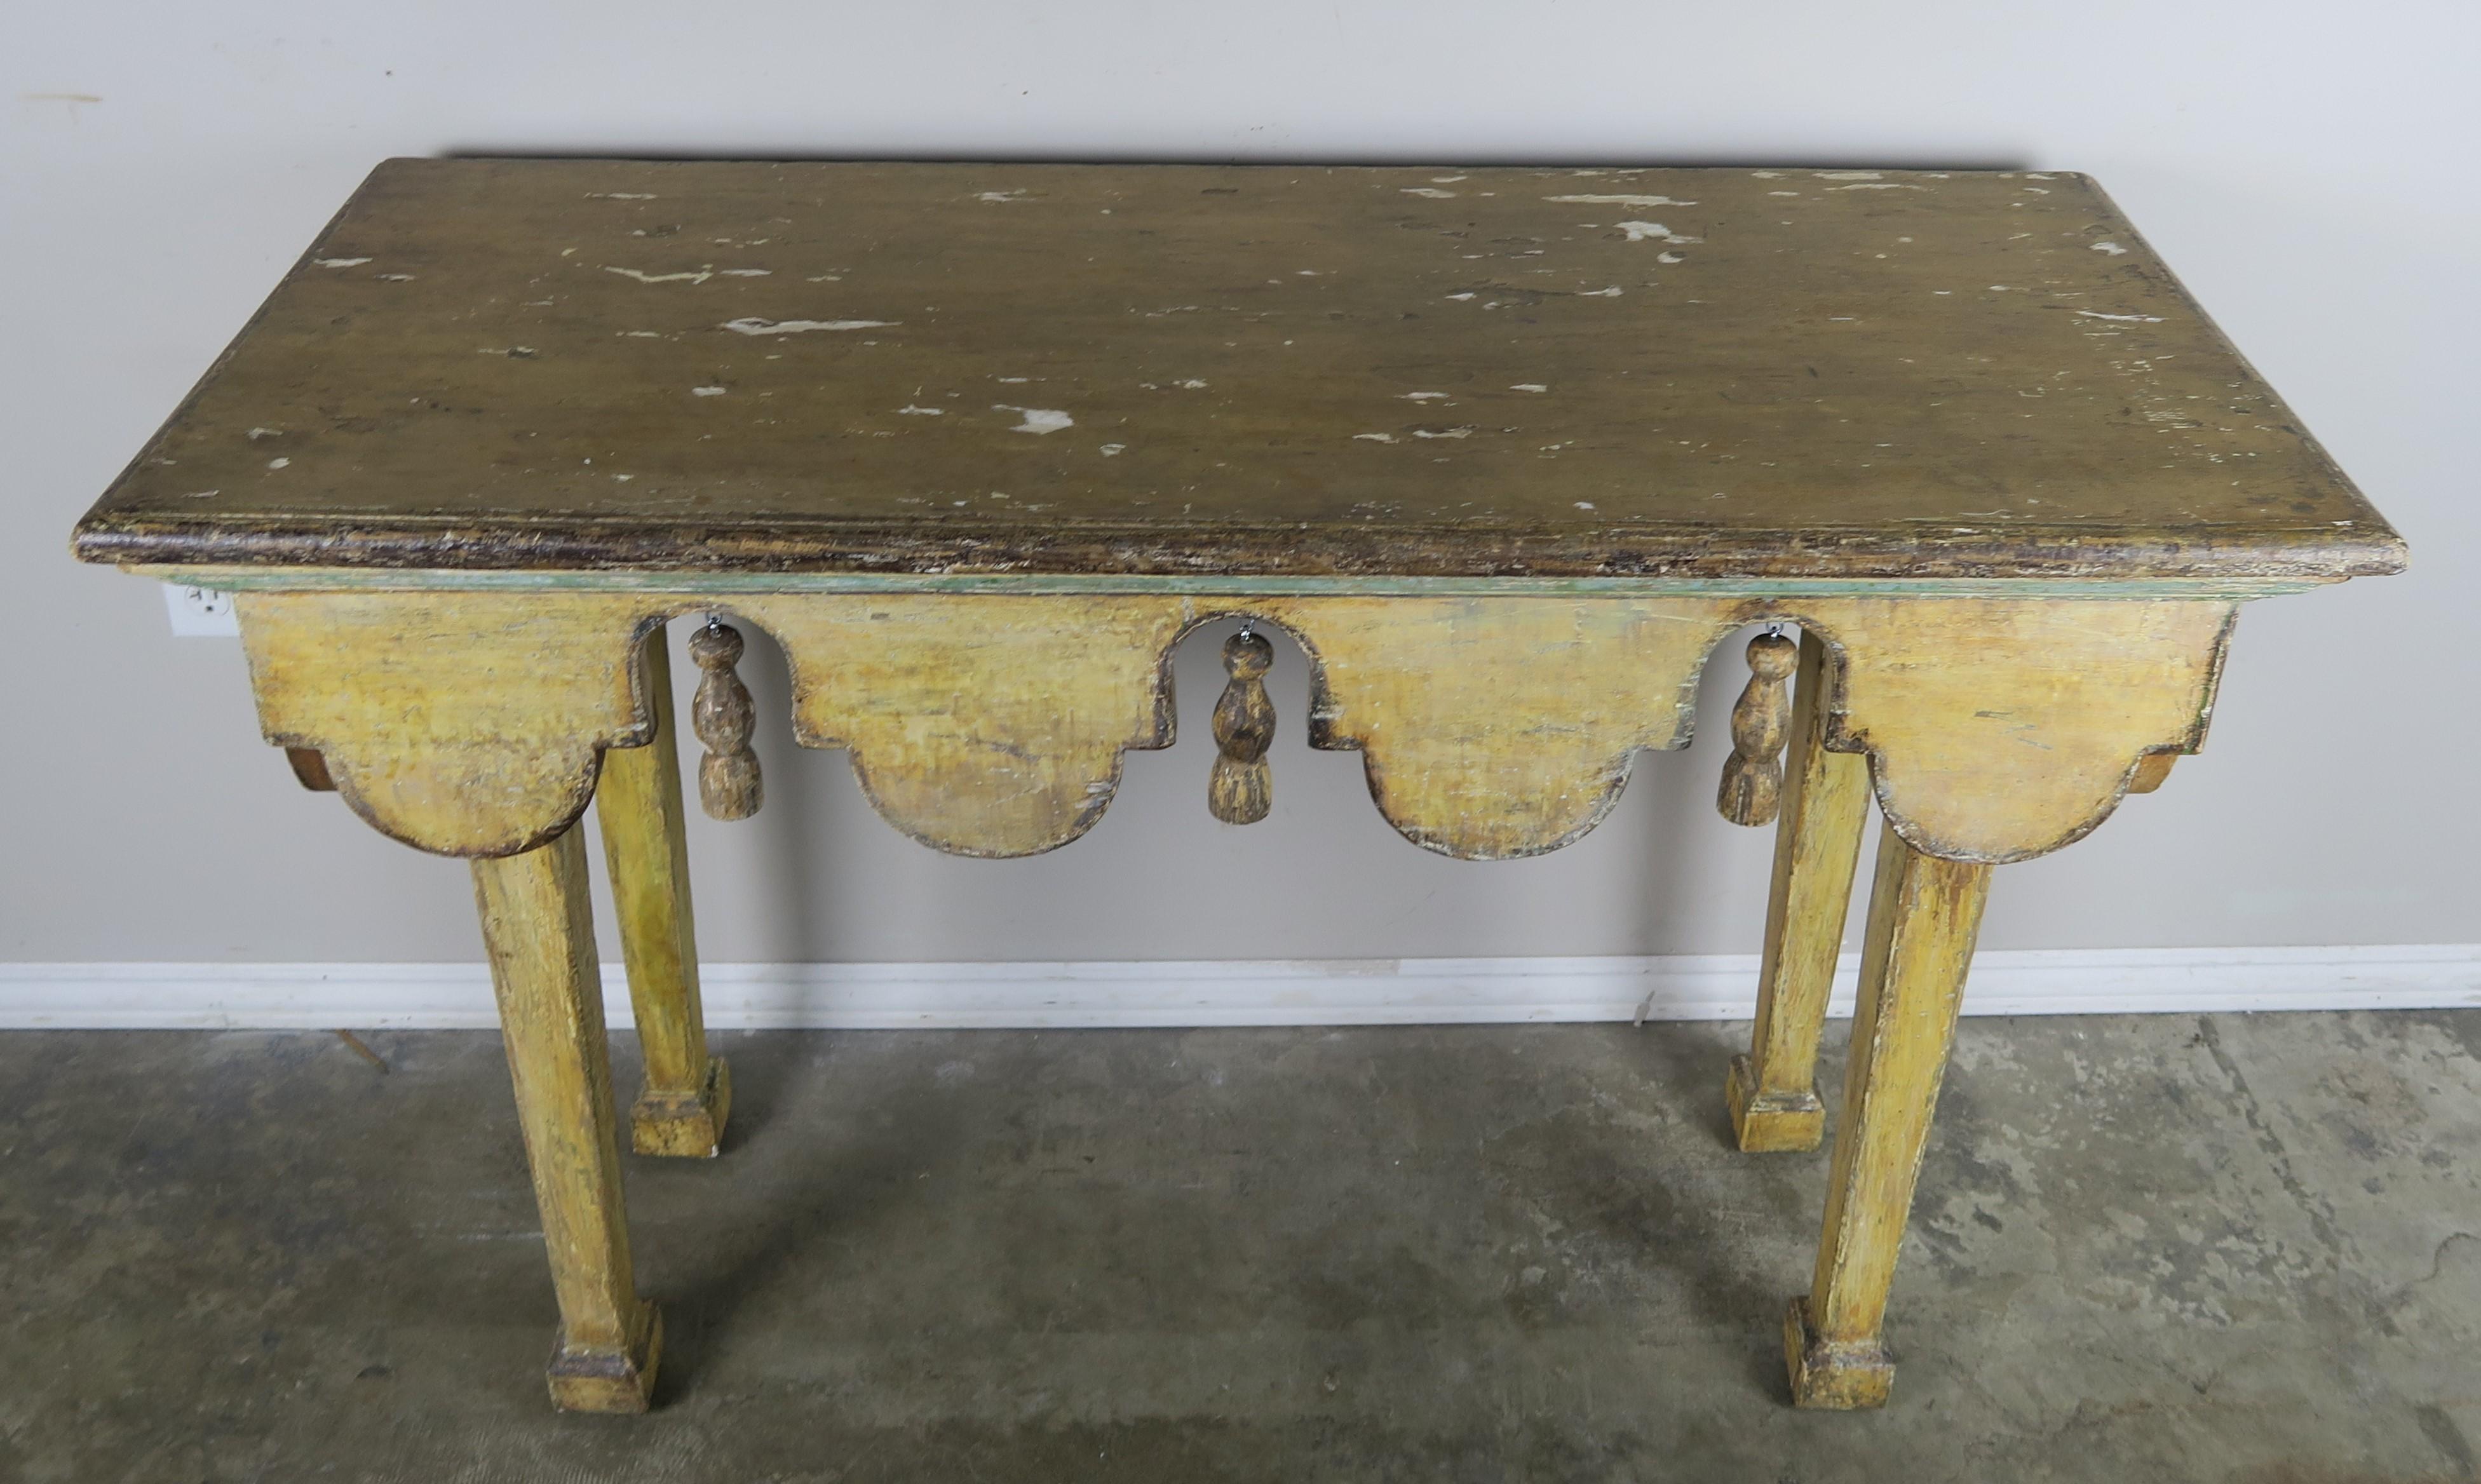 Painted Italian midcentury table with swags and carved tassels hanging between each swag. The table stands on four straight tapered legs. The paint is beautifully distressed with the natural wood showing underneath in areas.